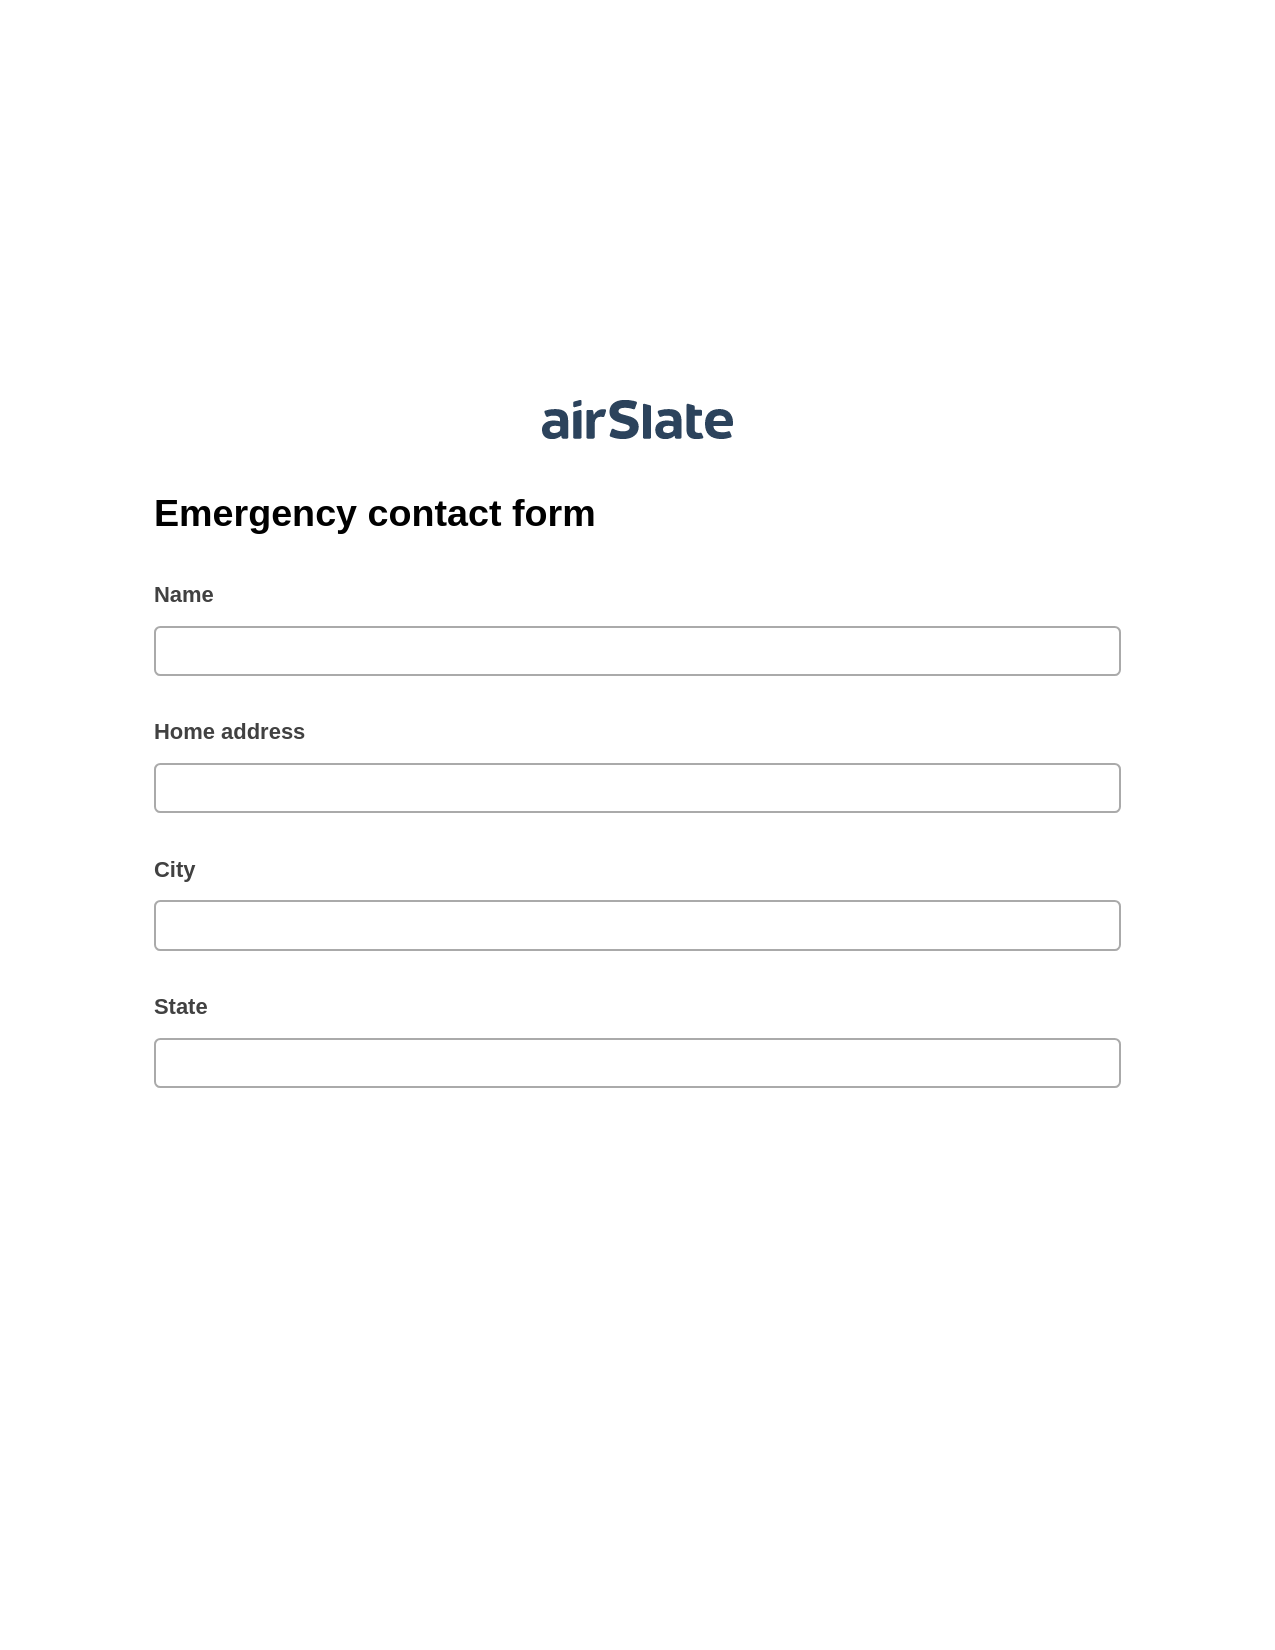 Emergency contact form Pre-fill Slate from MS Dynamics 365 Records Bot, Reminder Bot, Email Notification Postfinish Bot